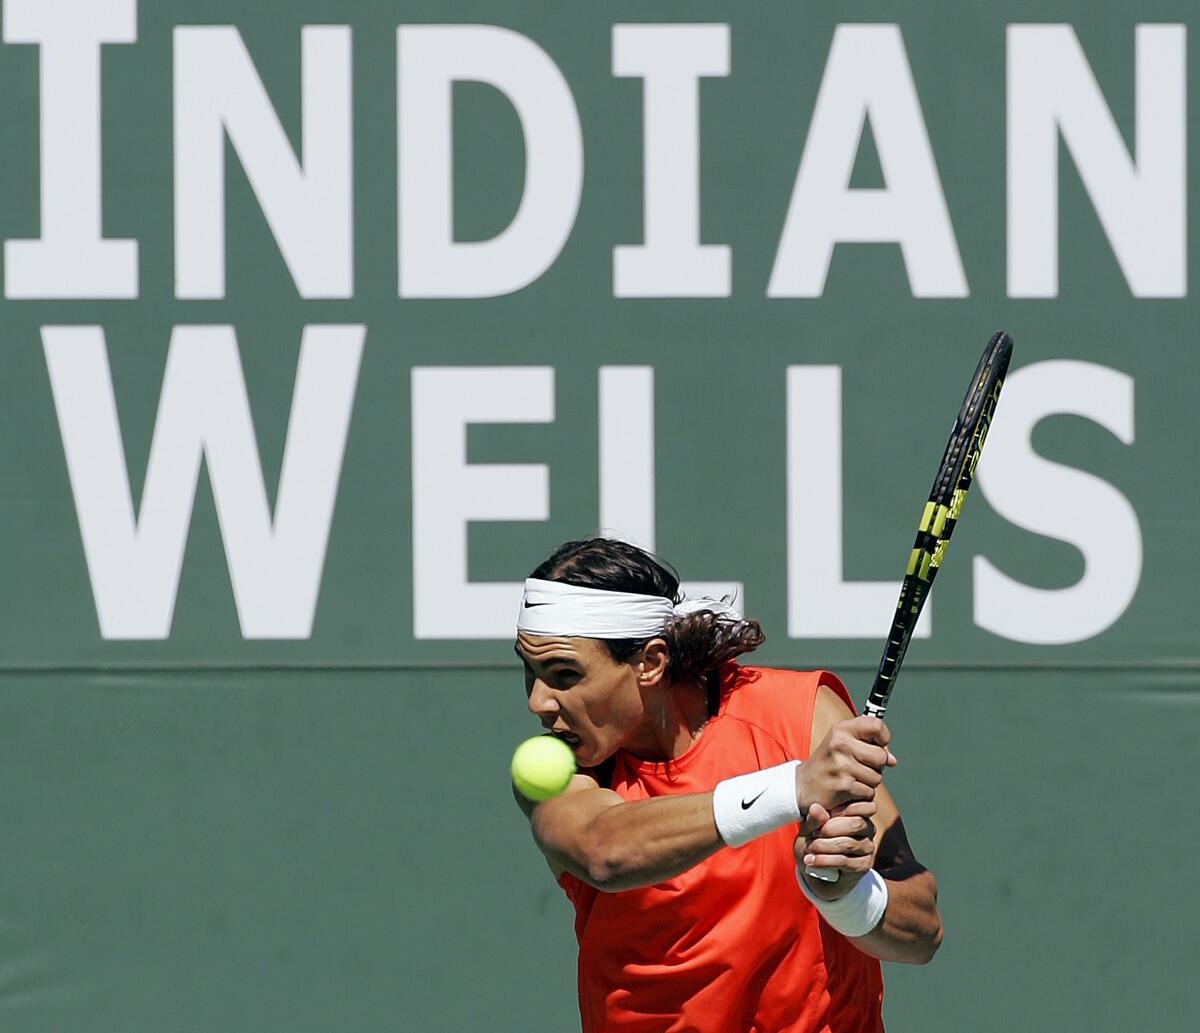 Rafael Nadal hits a return during a match at Indian Wells in March 2006.